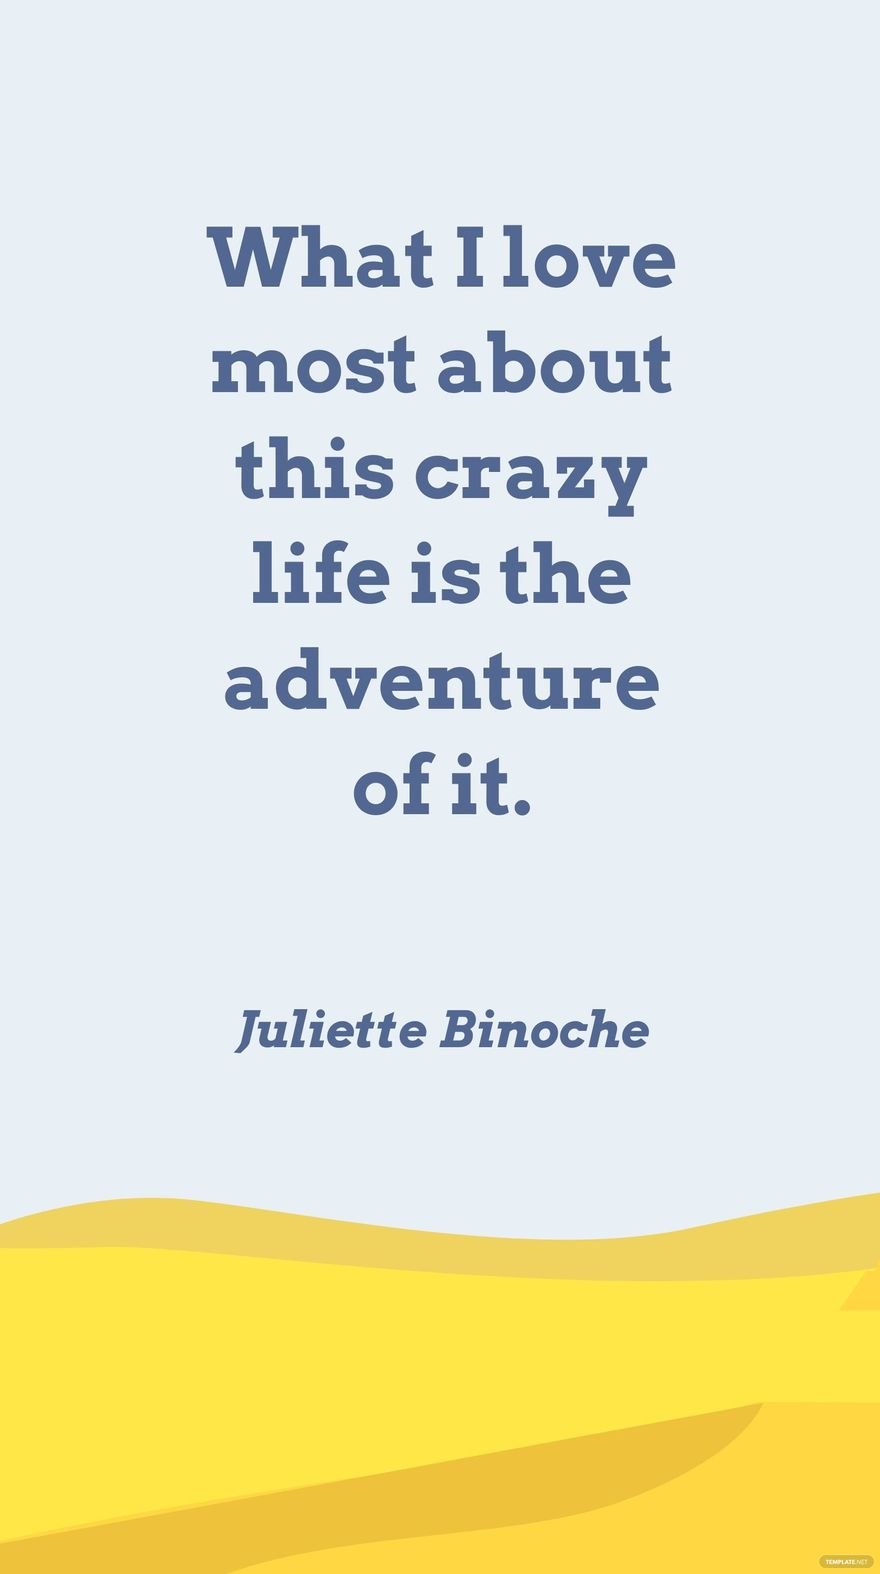 Free Juliette Binoche - What I love most about this crazy life is the adventure of it. in JPG